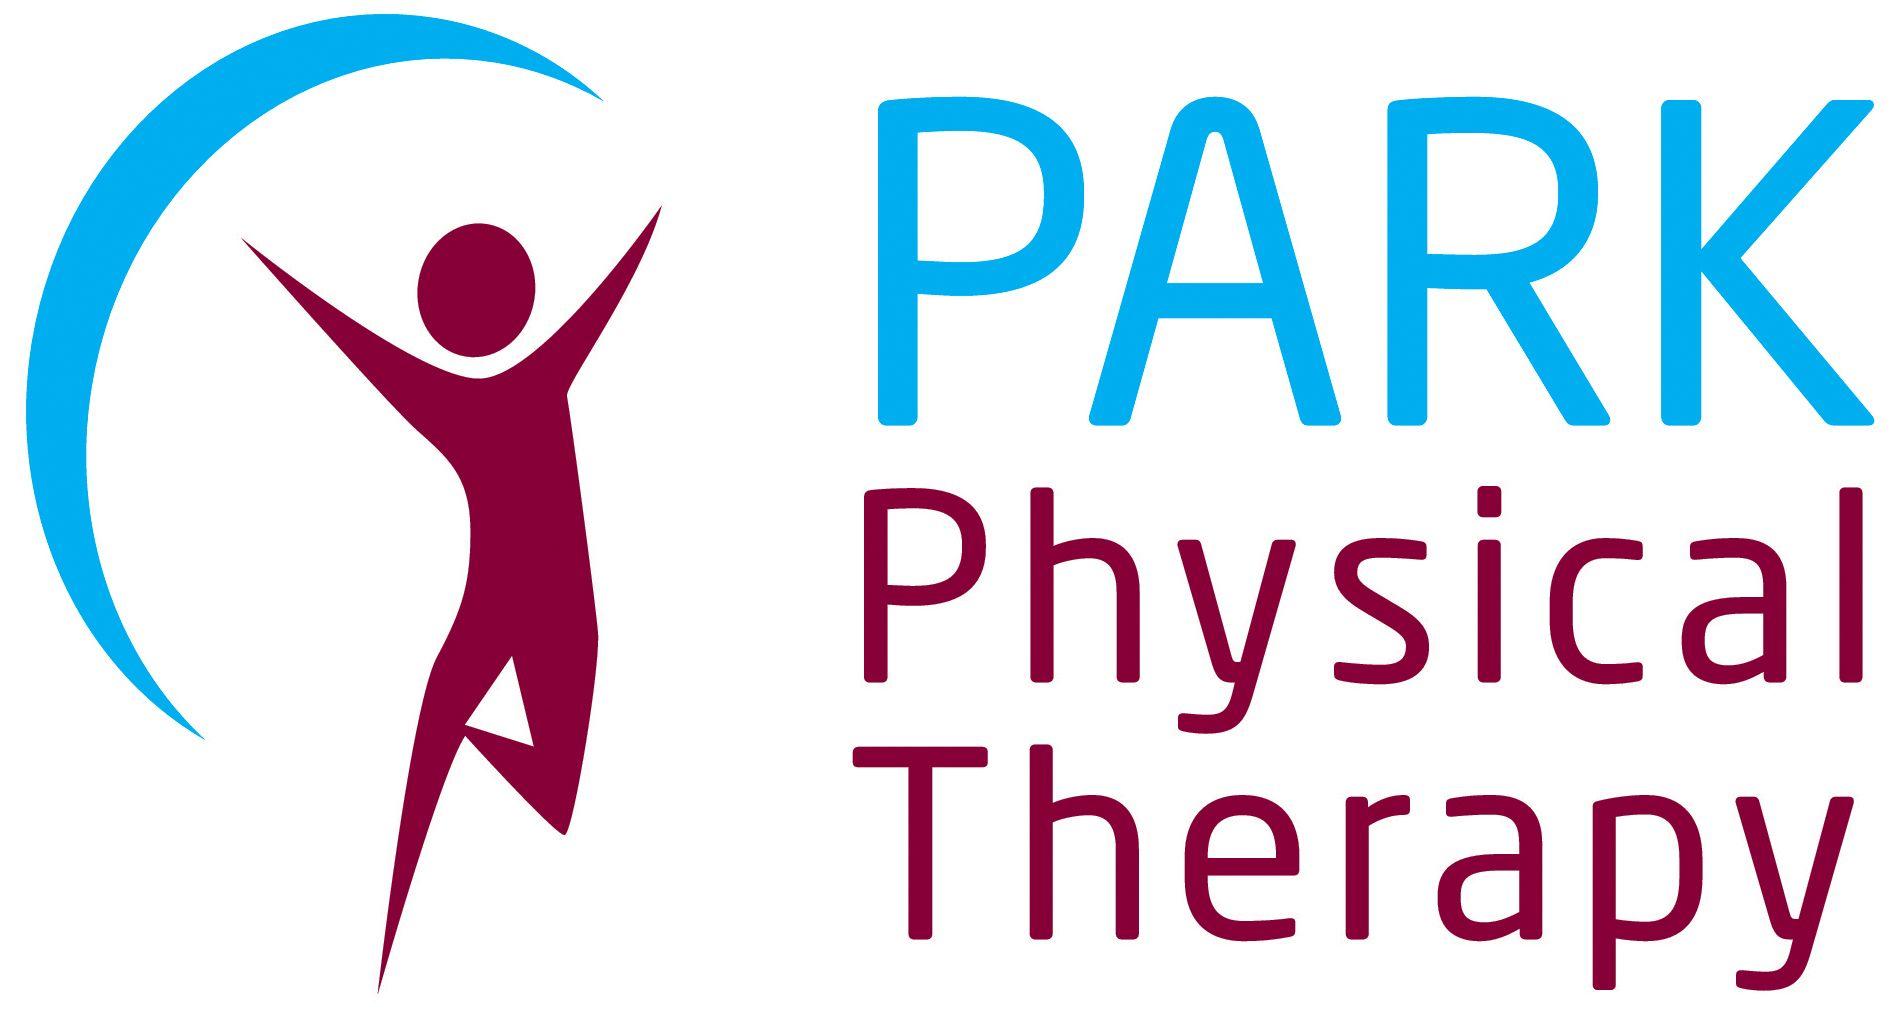 Physical Therapist Logo - Physical therapy Logos